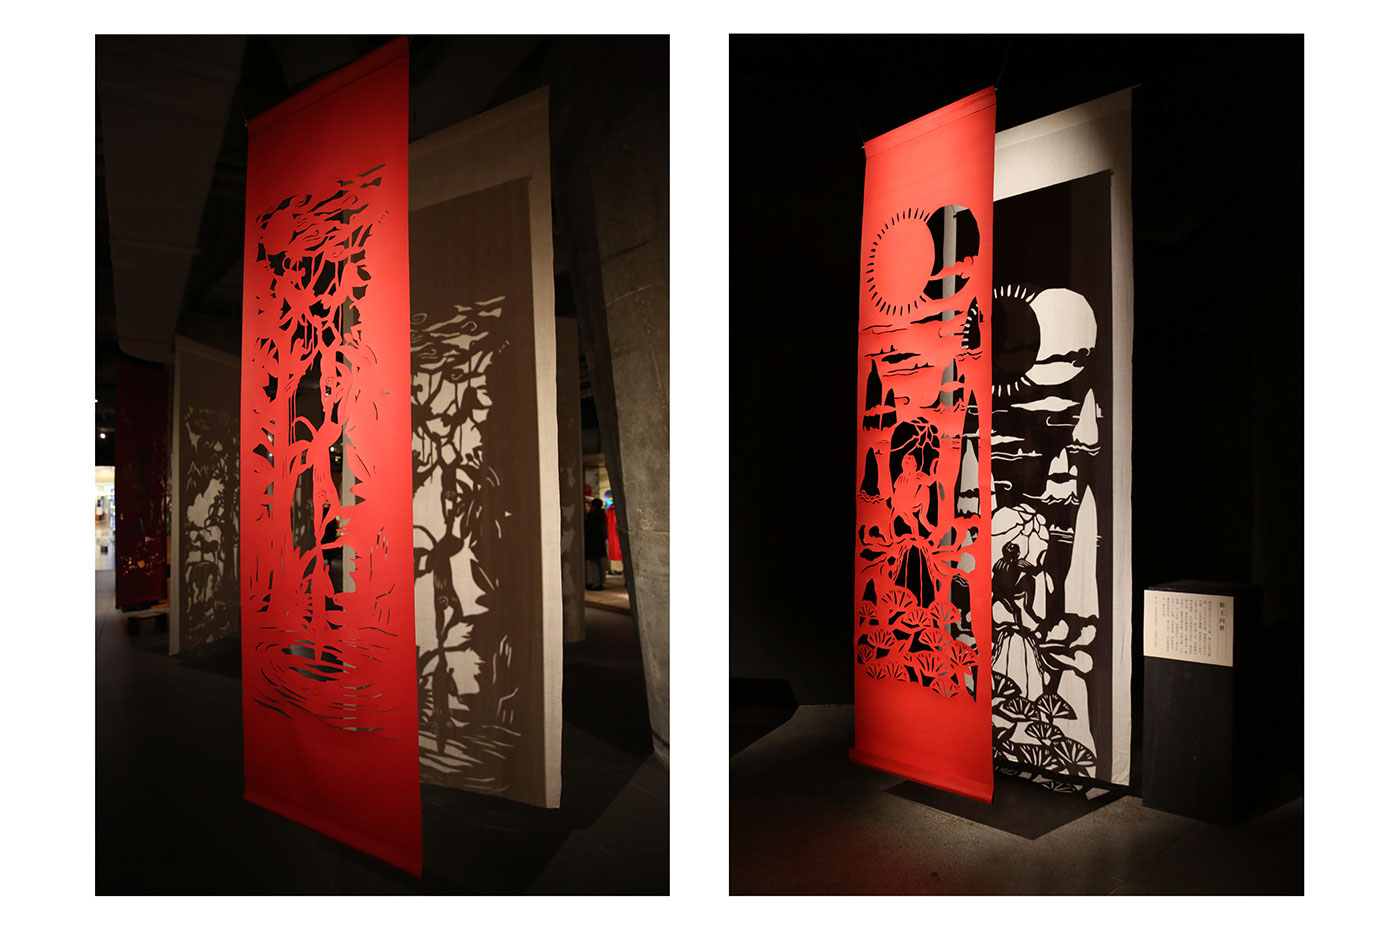 motion graphic graphic design  春节 猴年 剪纸 展览 branding  creative spring festival chinese